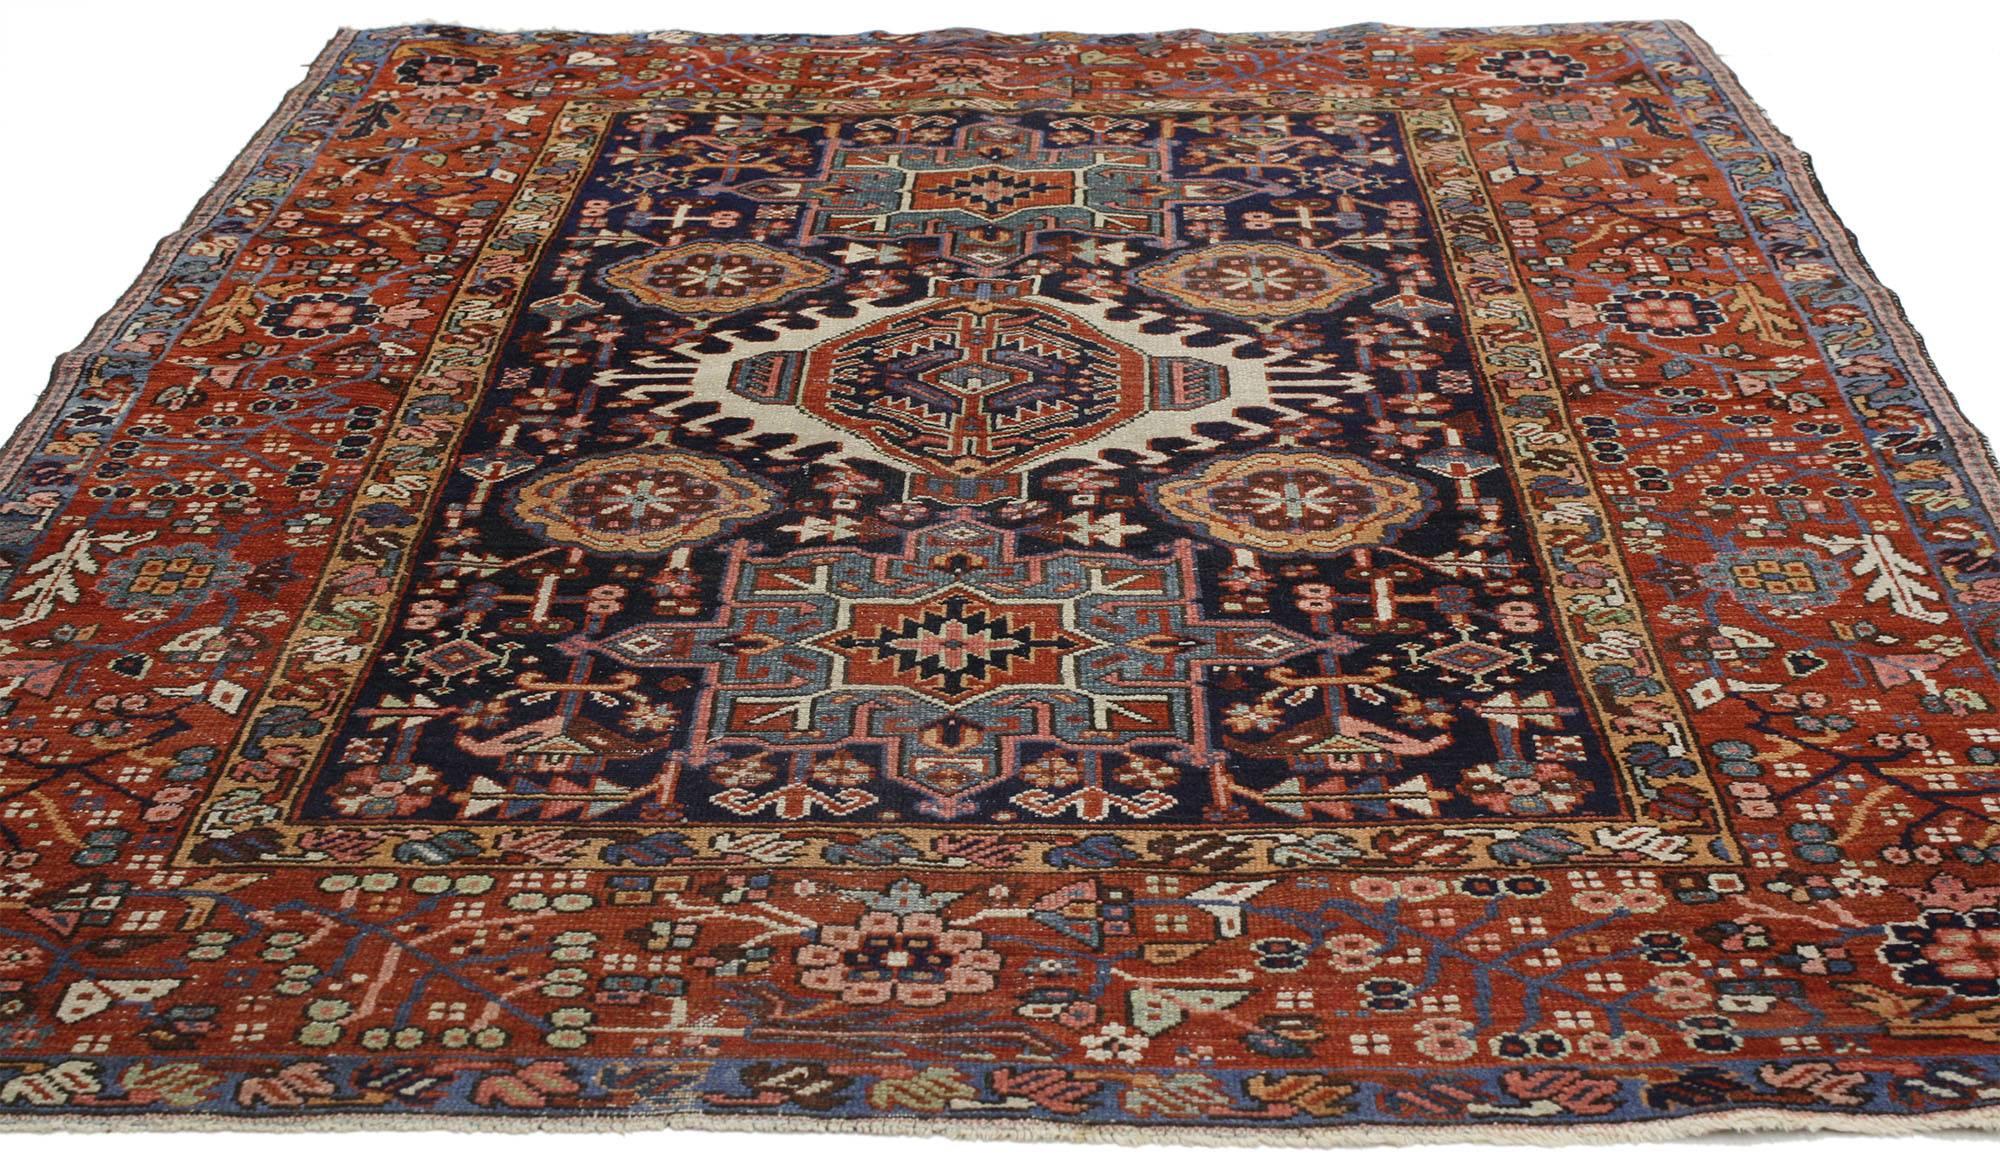 77070, antique Persian Heriz rug with tribal style. This hand-knotted wool antique Persian Heriz rug features three medallions with amulet style motifs. The central medallion outlined in a geometric Stark ivory thin border flanked by two amulets.